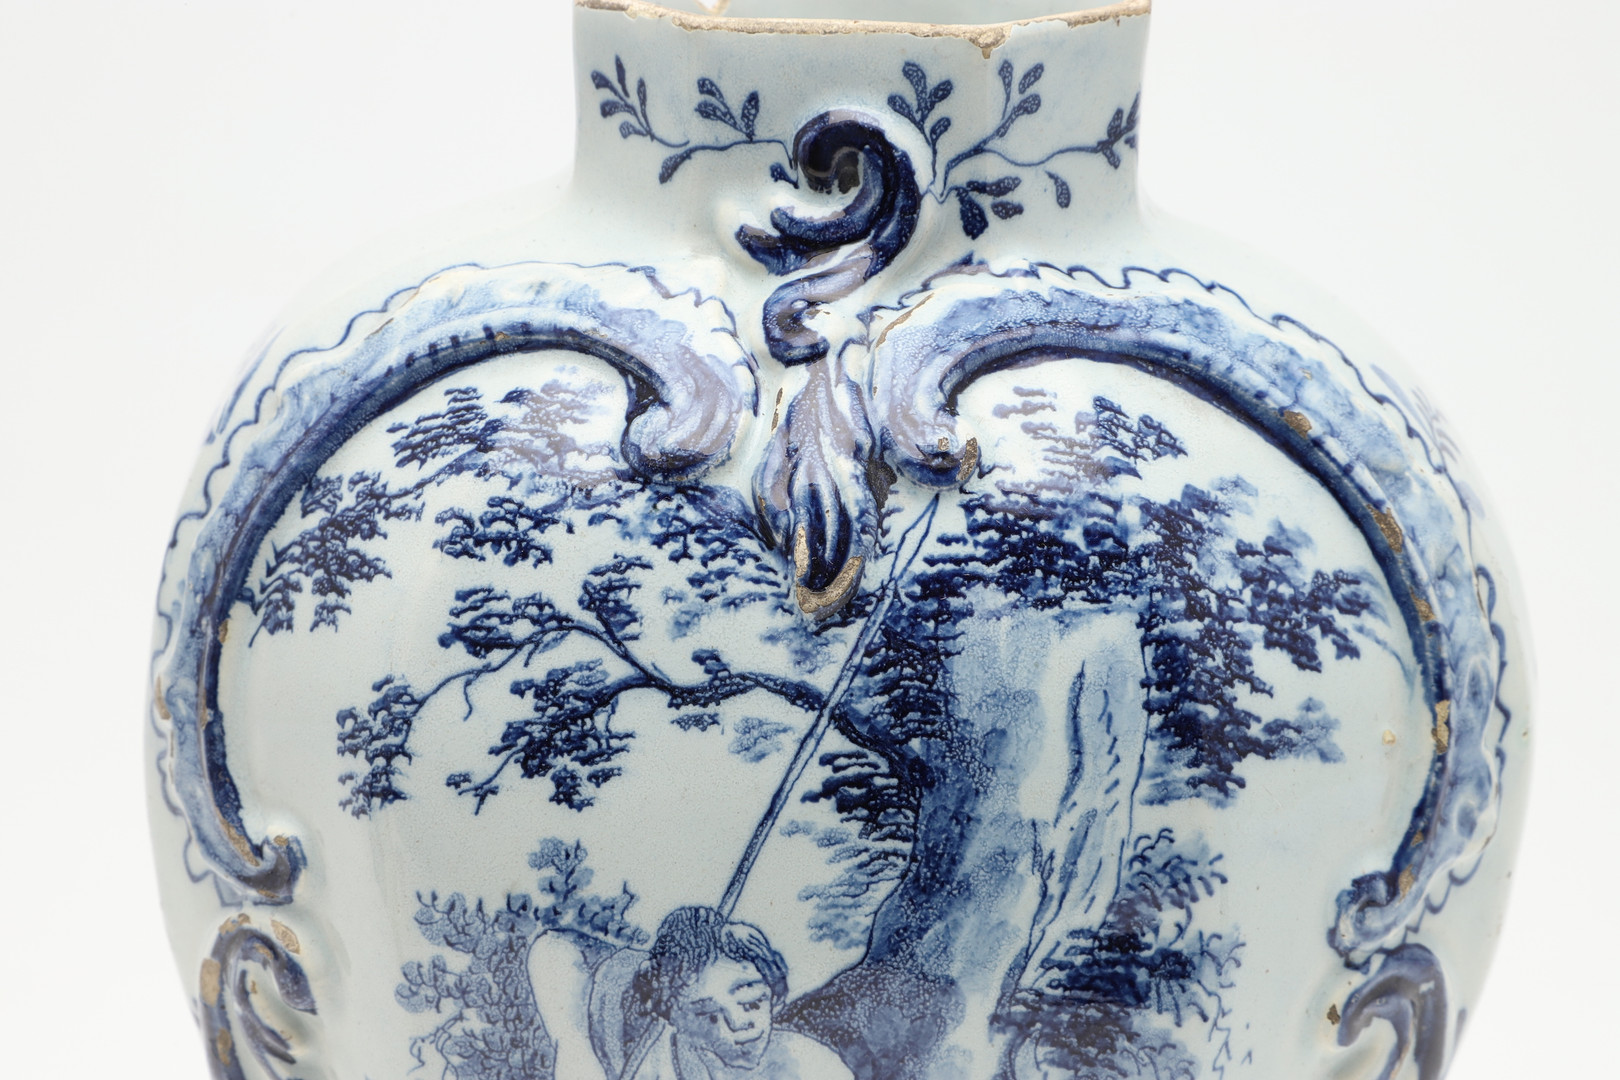 TWO PAIRS OF ANTIQUE DELFT VASES & ANOTHER VASE. - Image 25 of 60